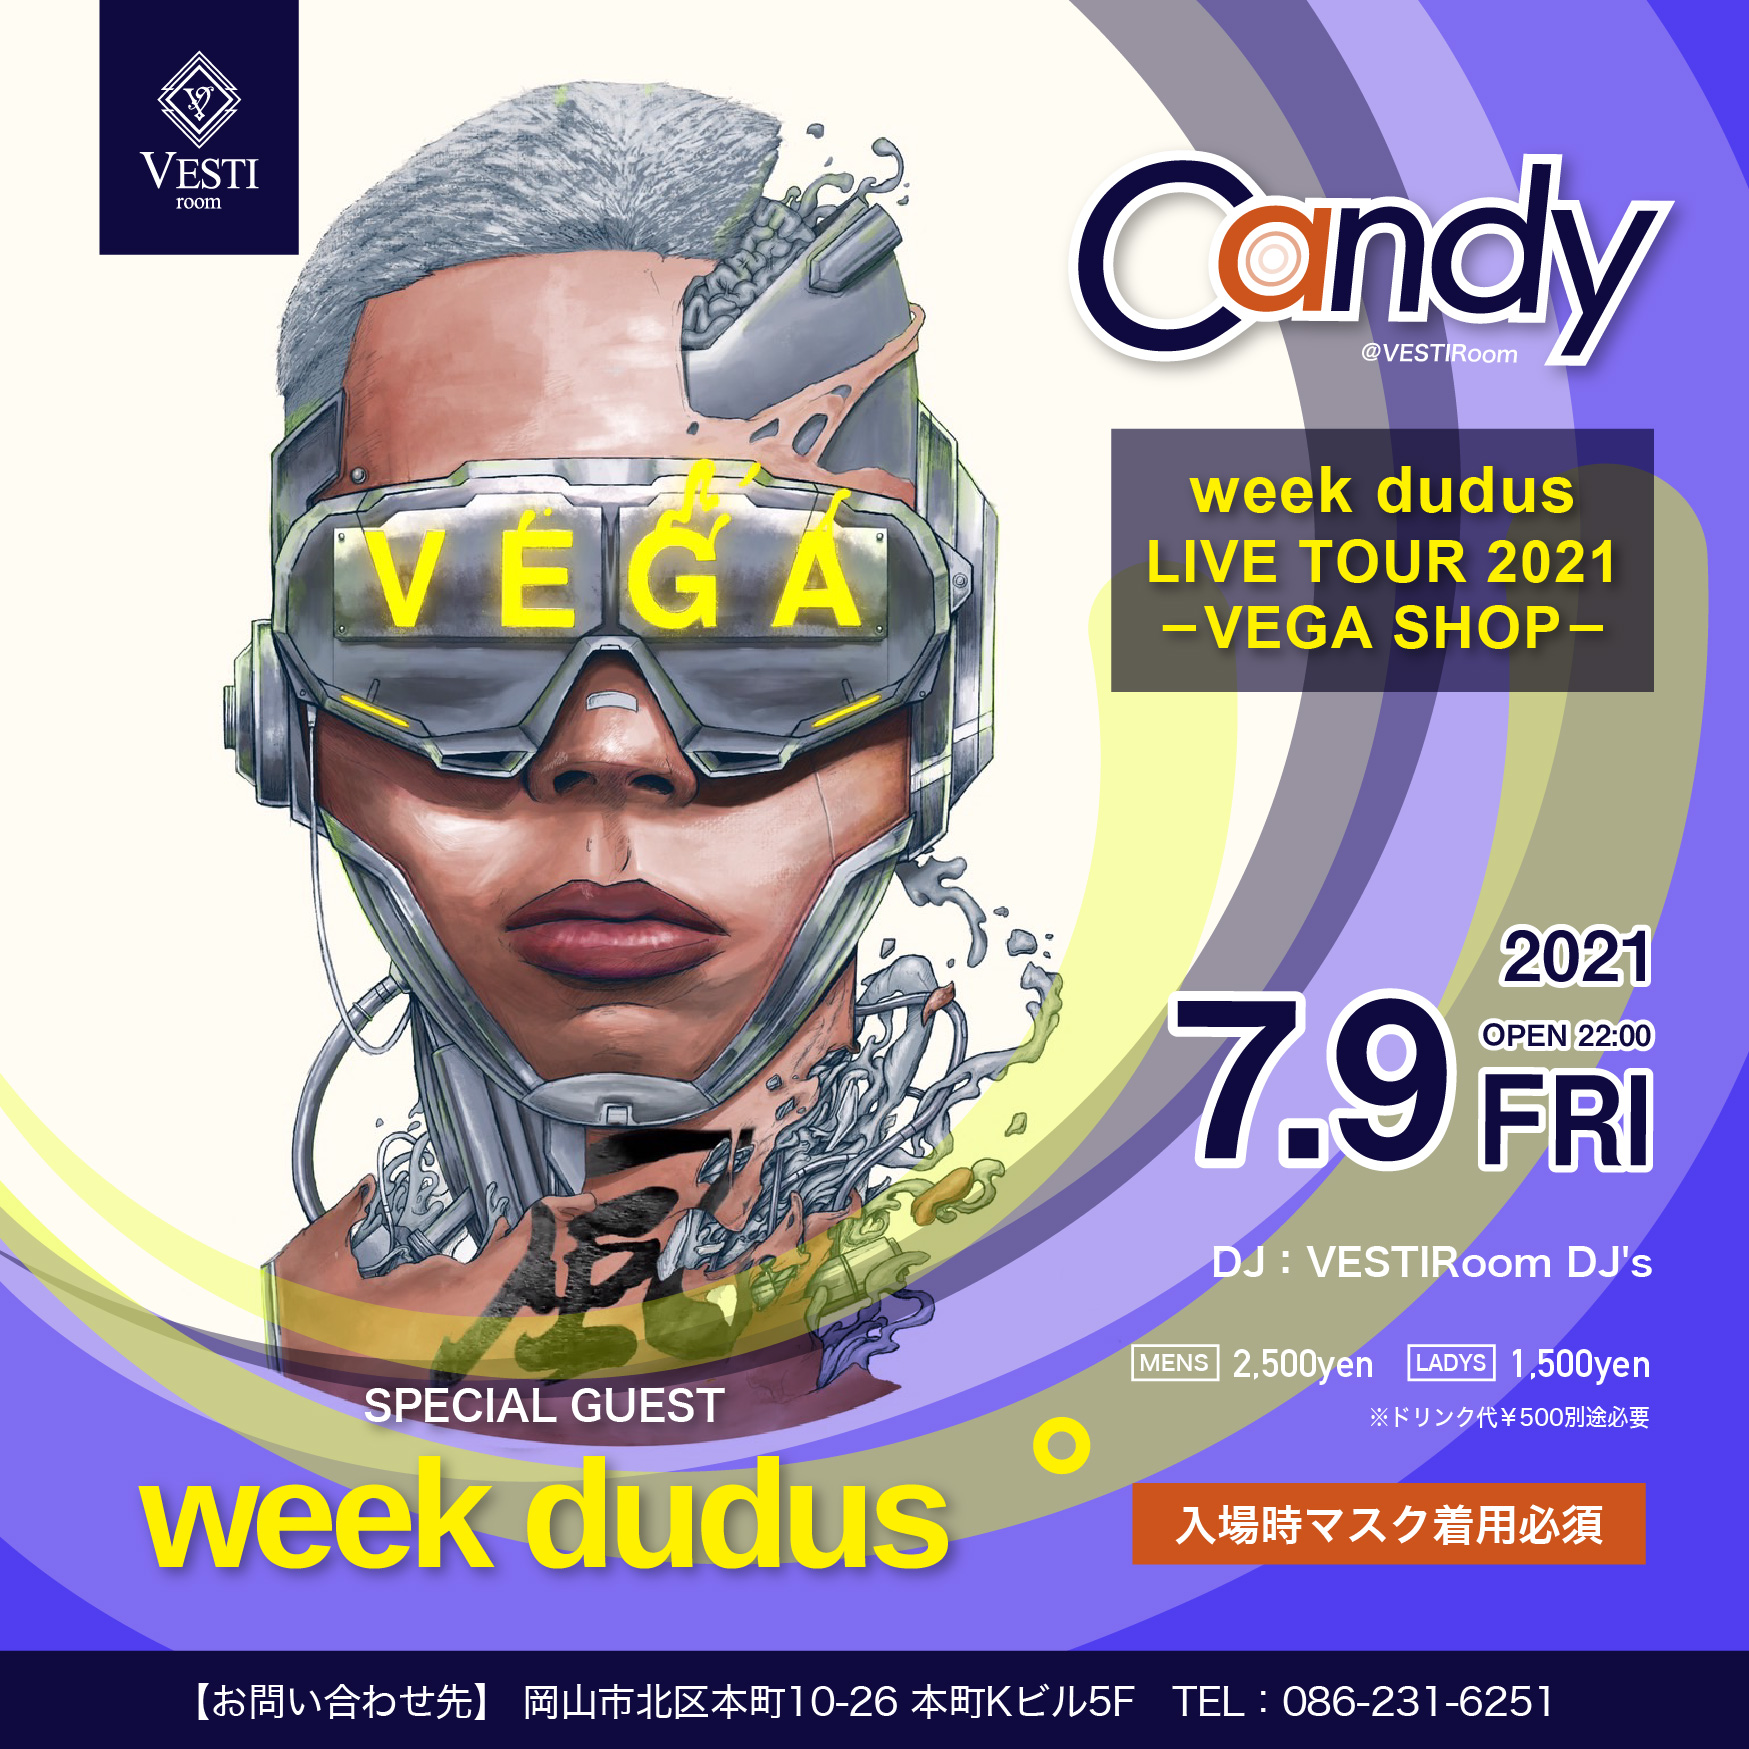 CANDY ～Special Guest : week dudus～